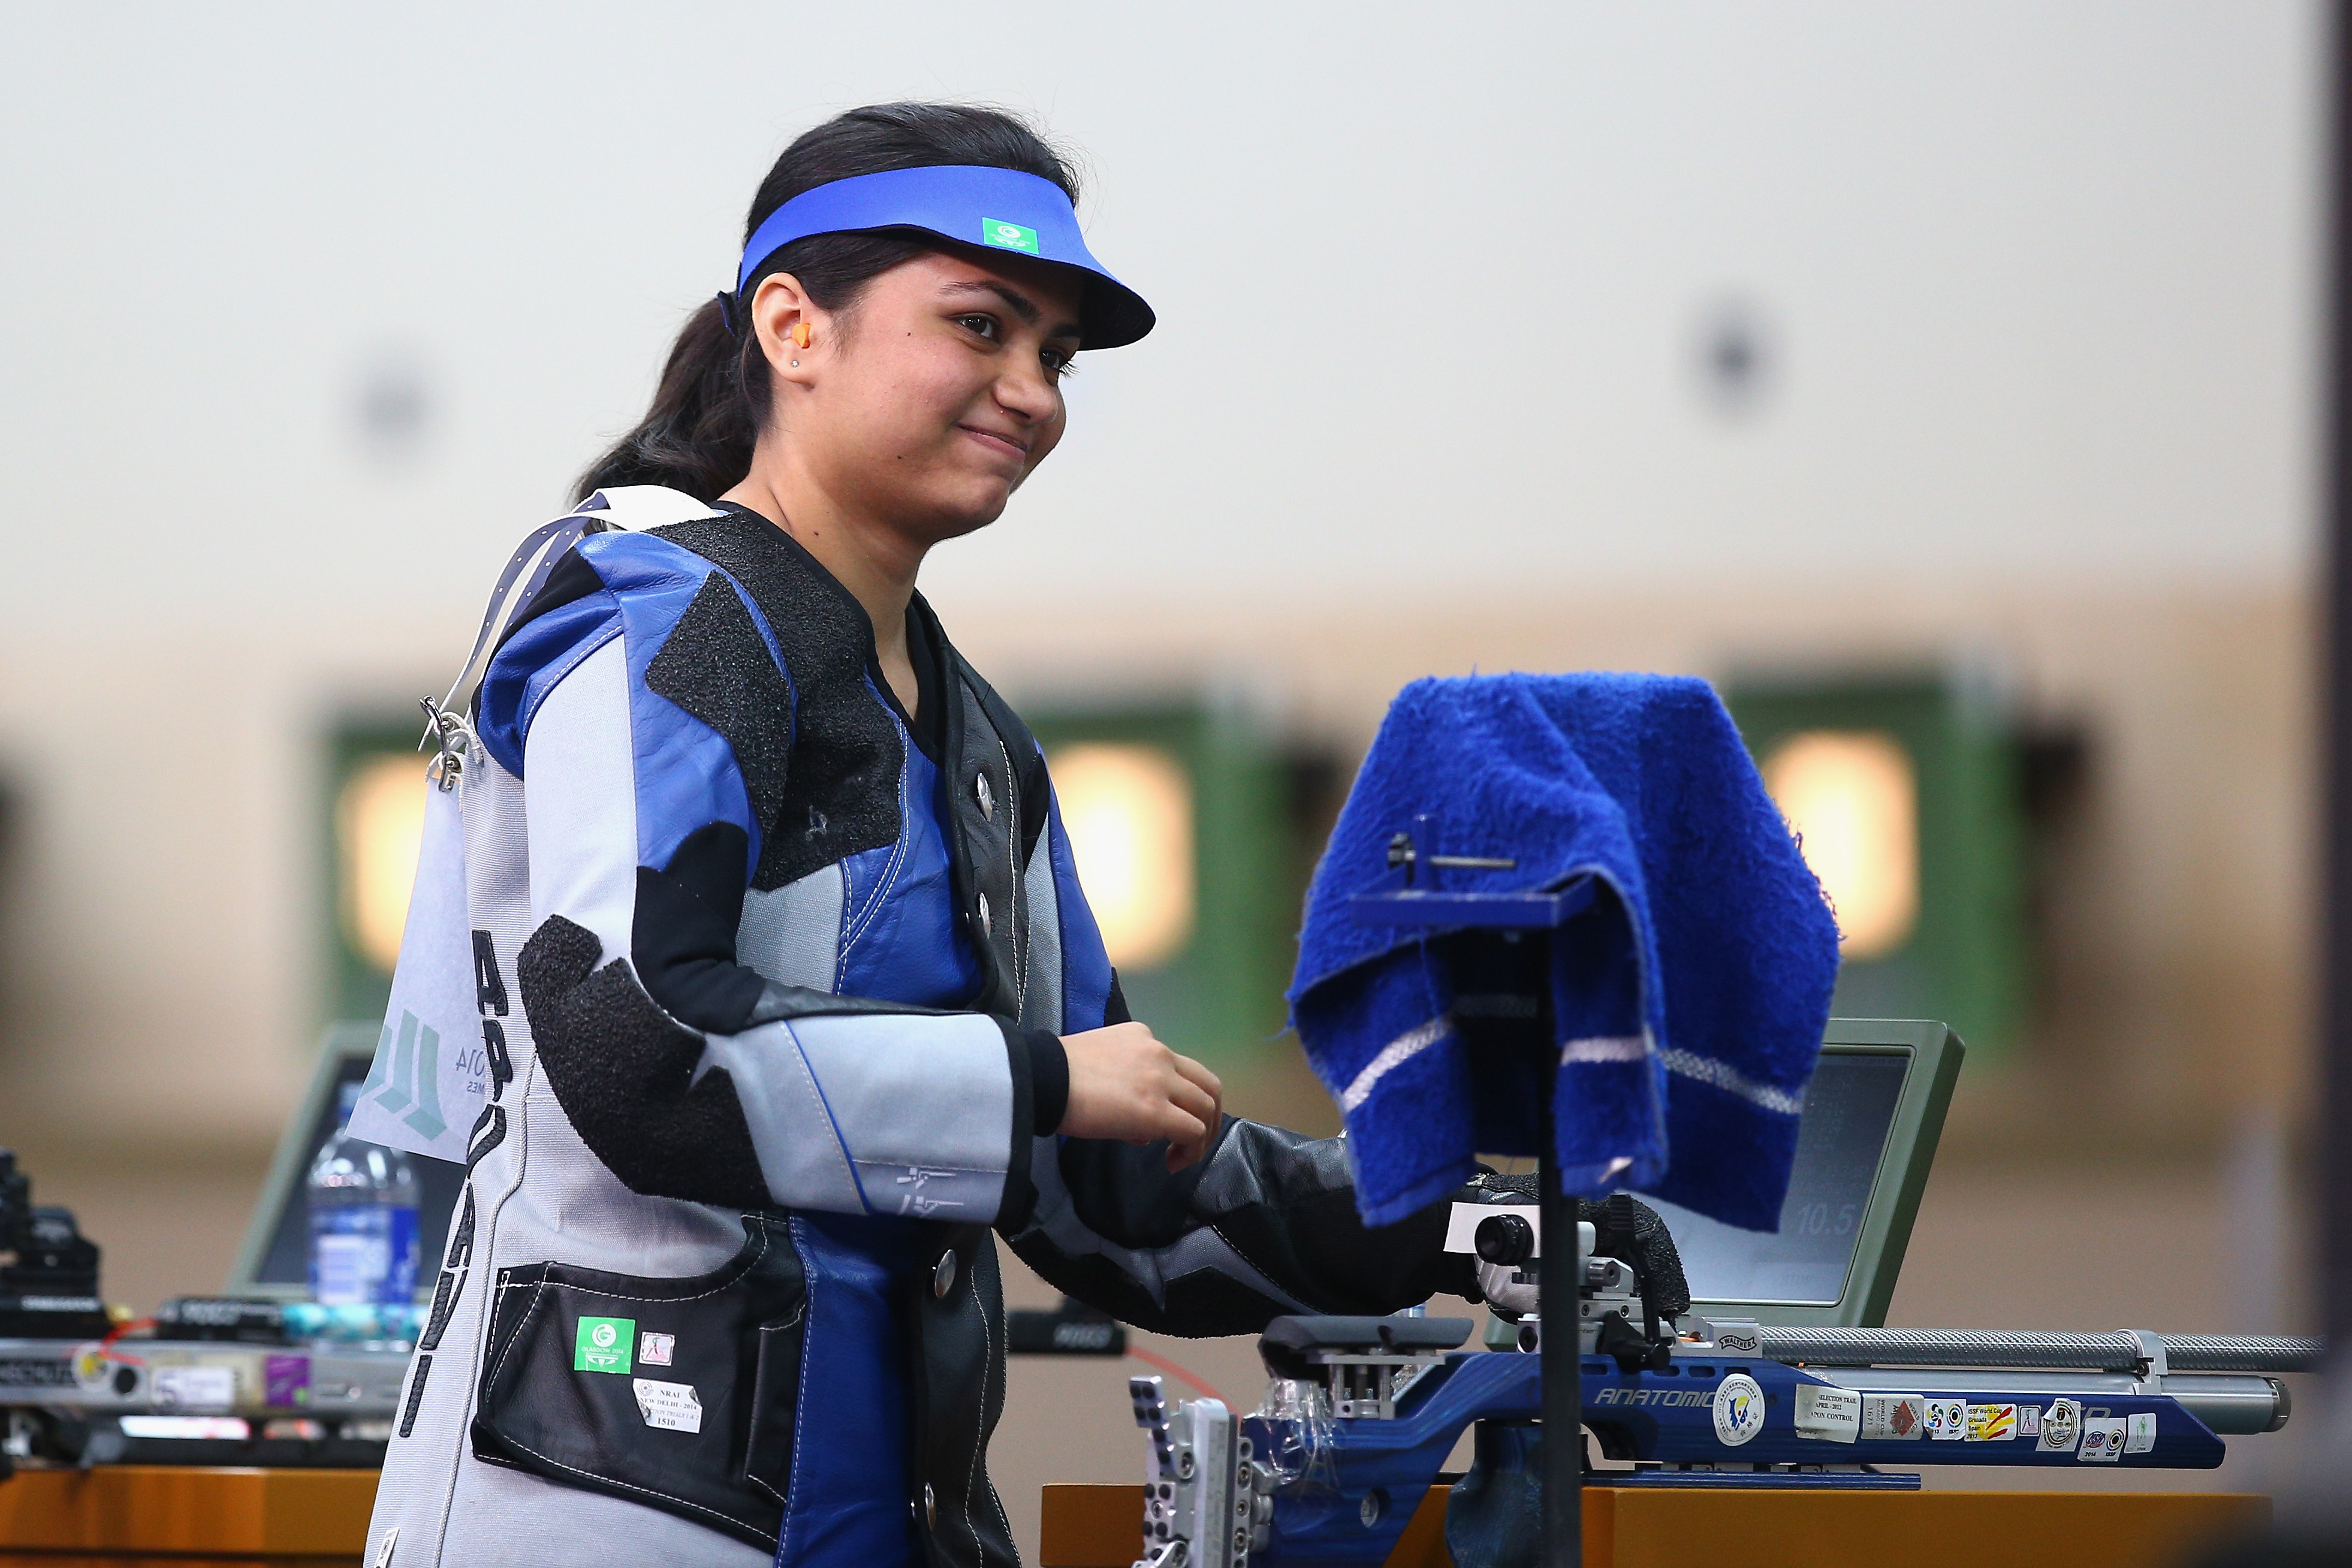 Rio 2016 | Apurvi Chandela and Ayonika Paul disappoint in 10m air rifle; Du Li creates Olympic record